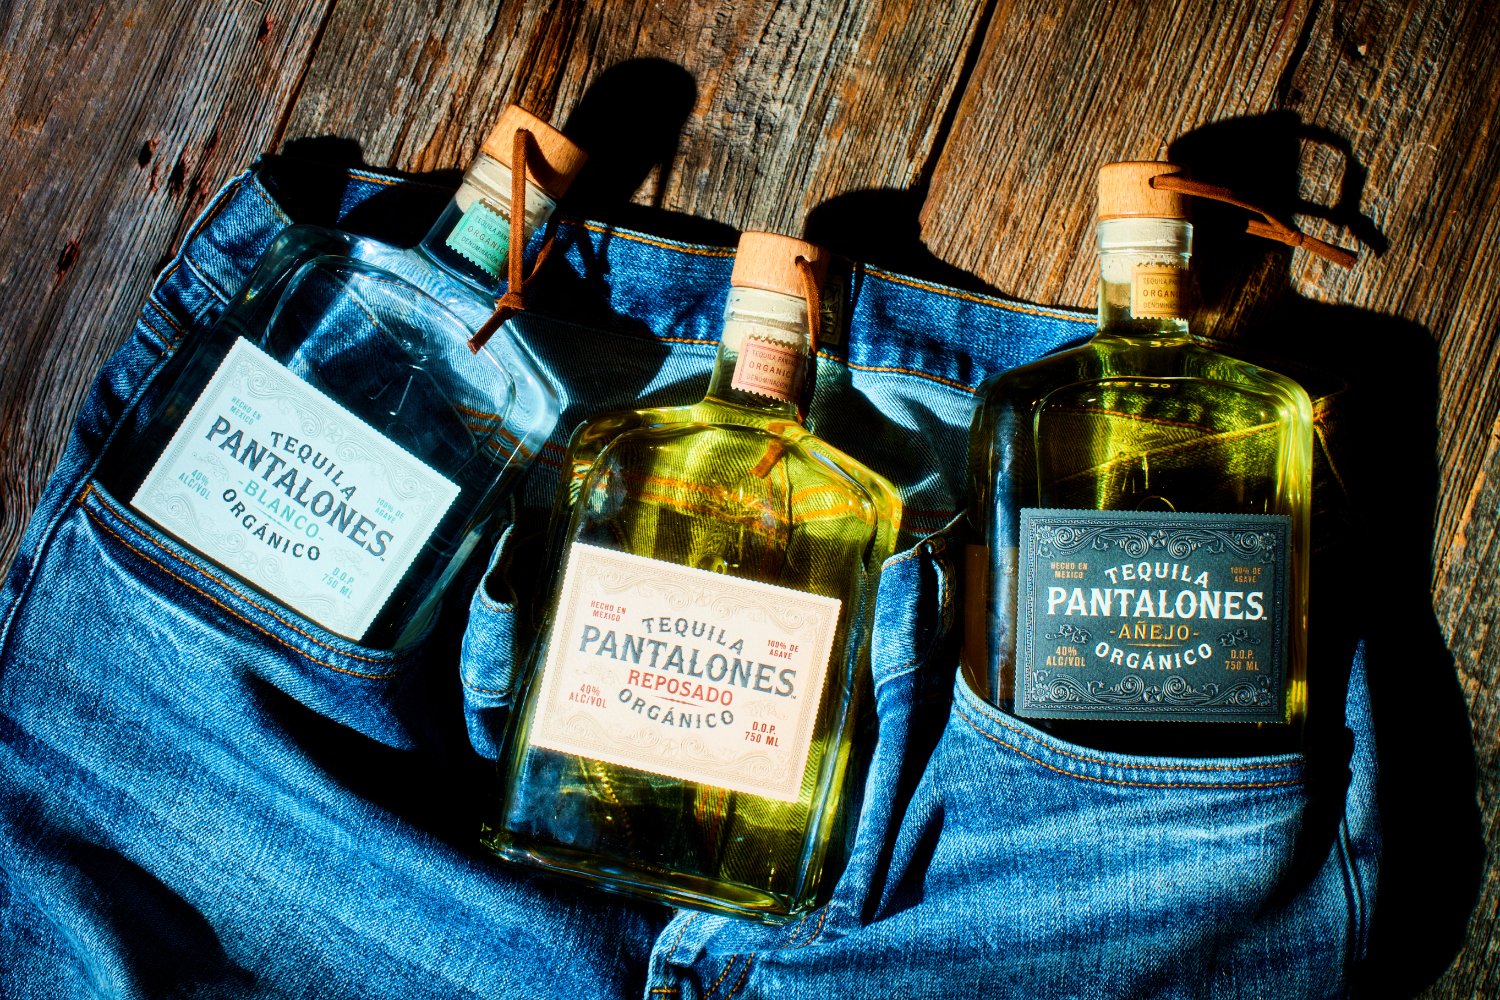 Matthew McConaughey’s “Fancy Pants” Tequila Takes Inspiration from a Great Pair of Pants